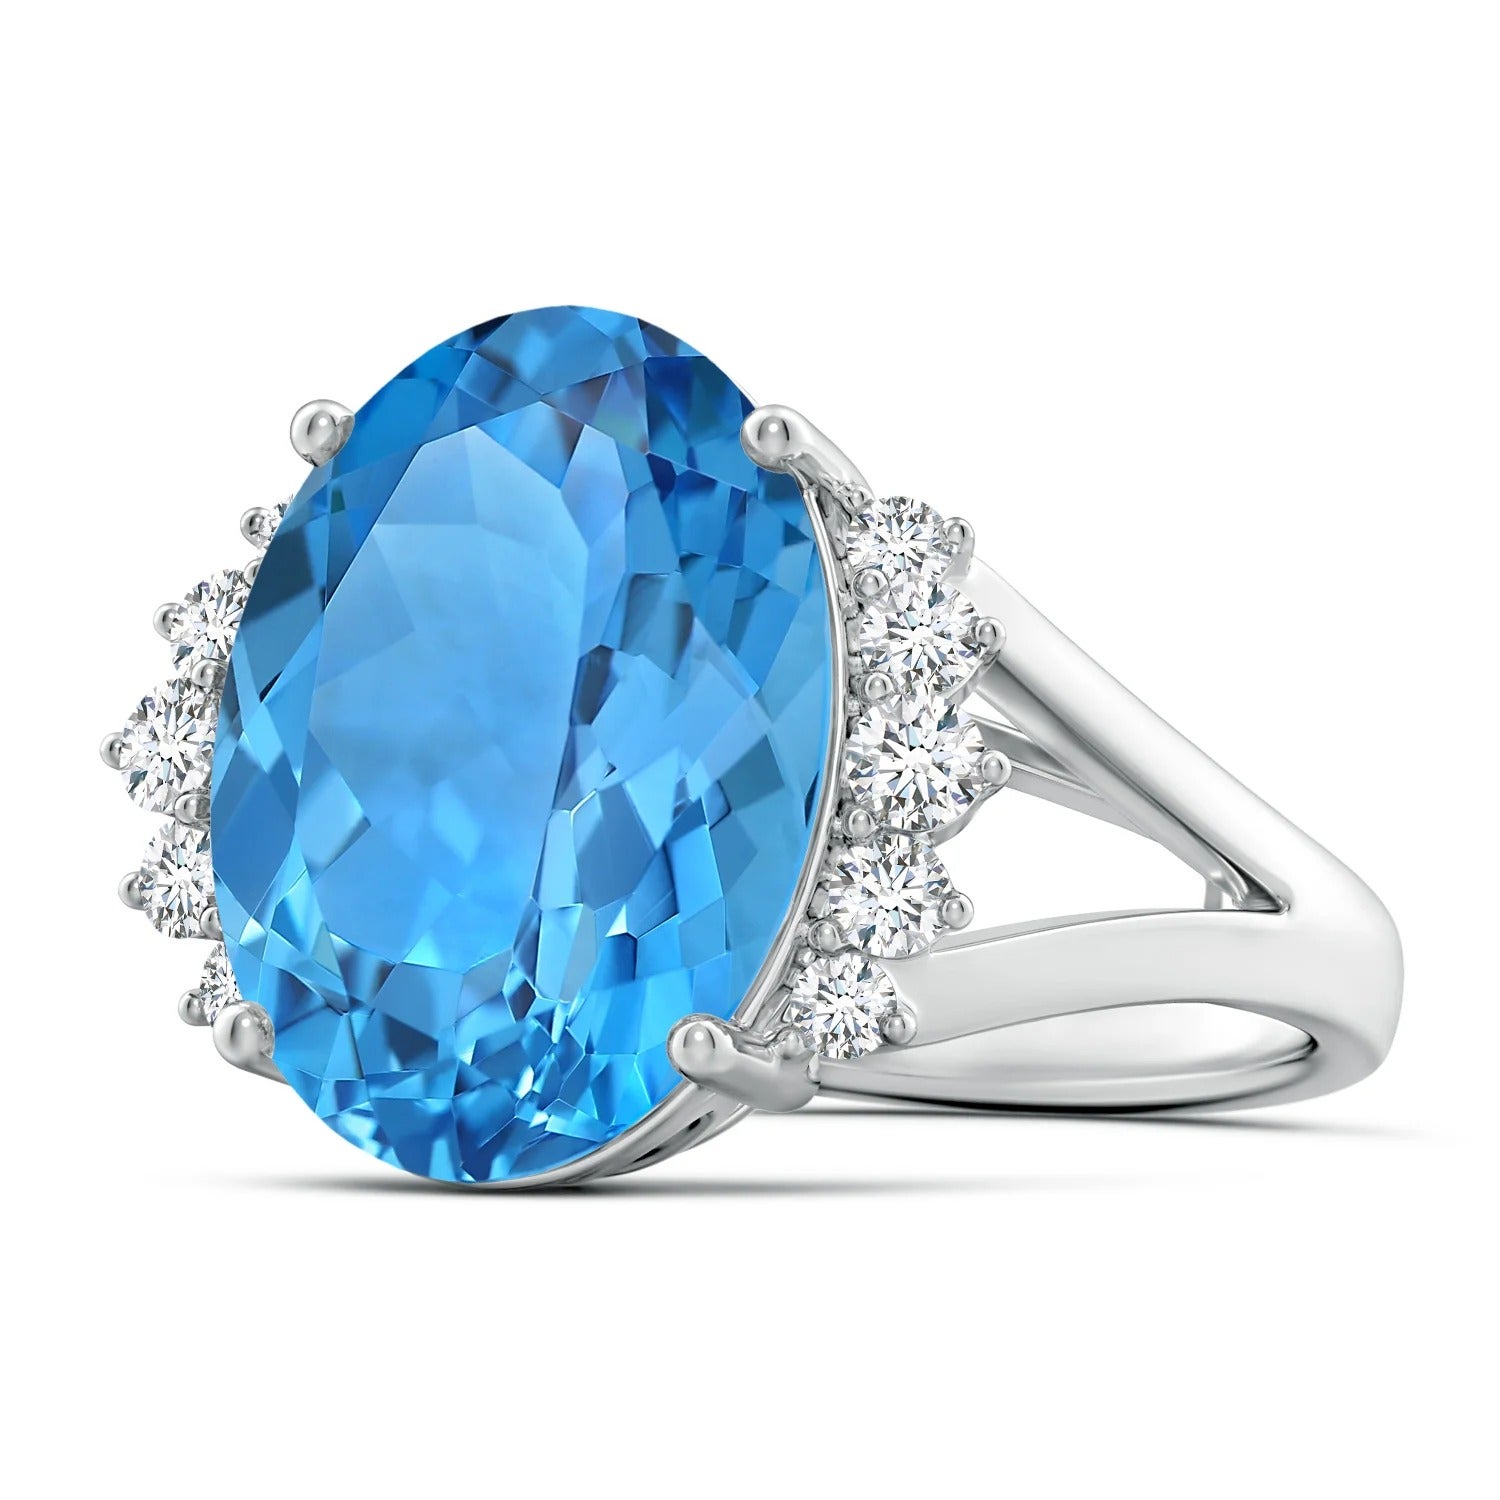 ANGARA GIA Certified Natural Swiss Blue Topaz Ring in White Gold with Diamonds